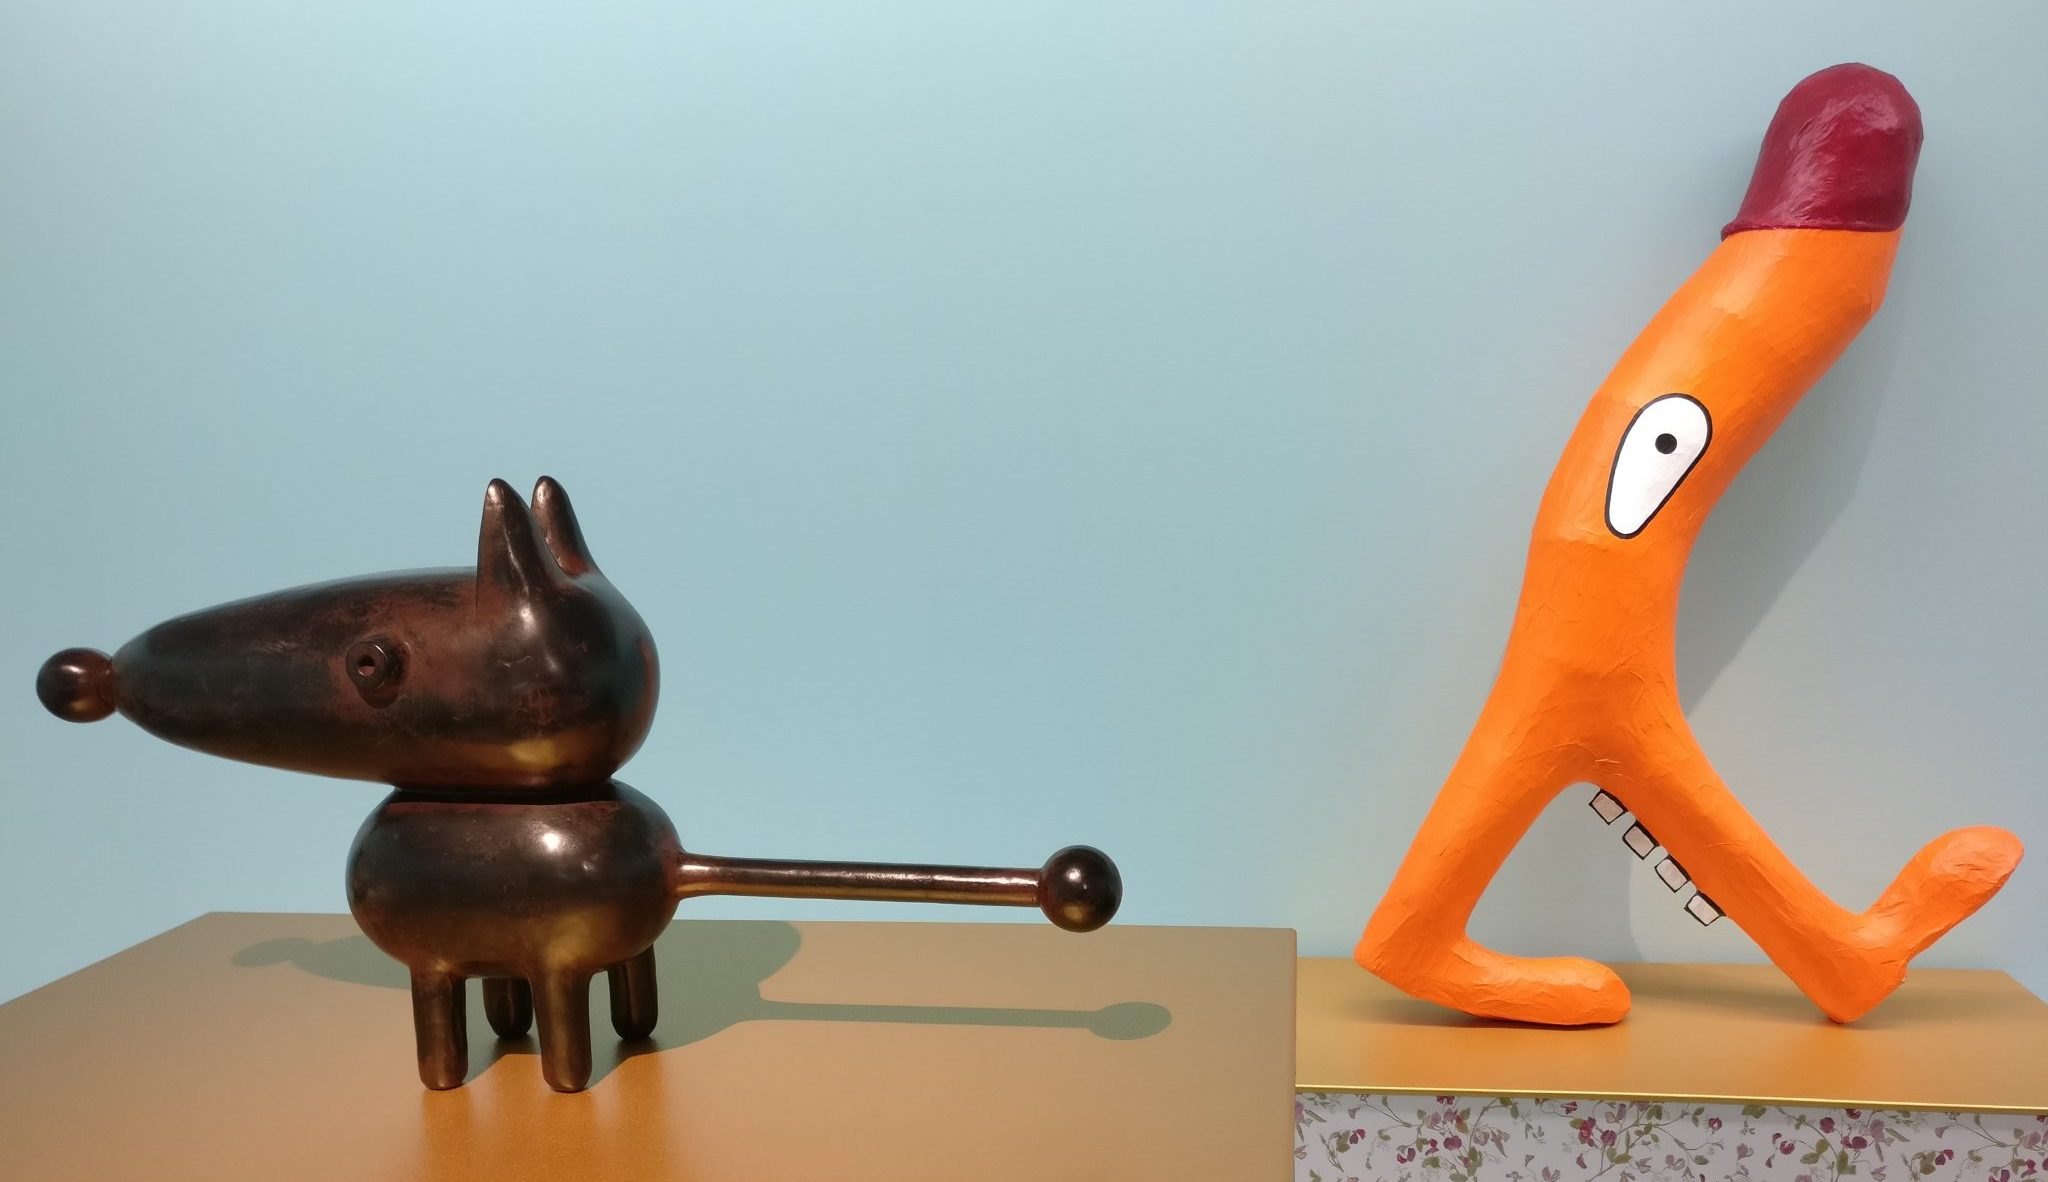 Joost van den Toorn: on the left, Atomic Dog, bronze from 2012; on the right, Hey ho lets go, paper mache from 1984